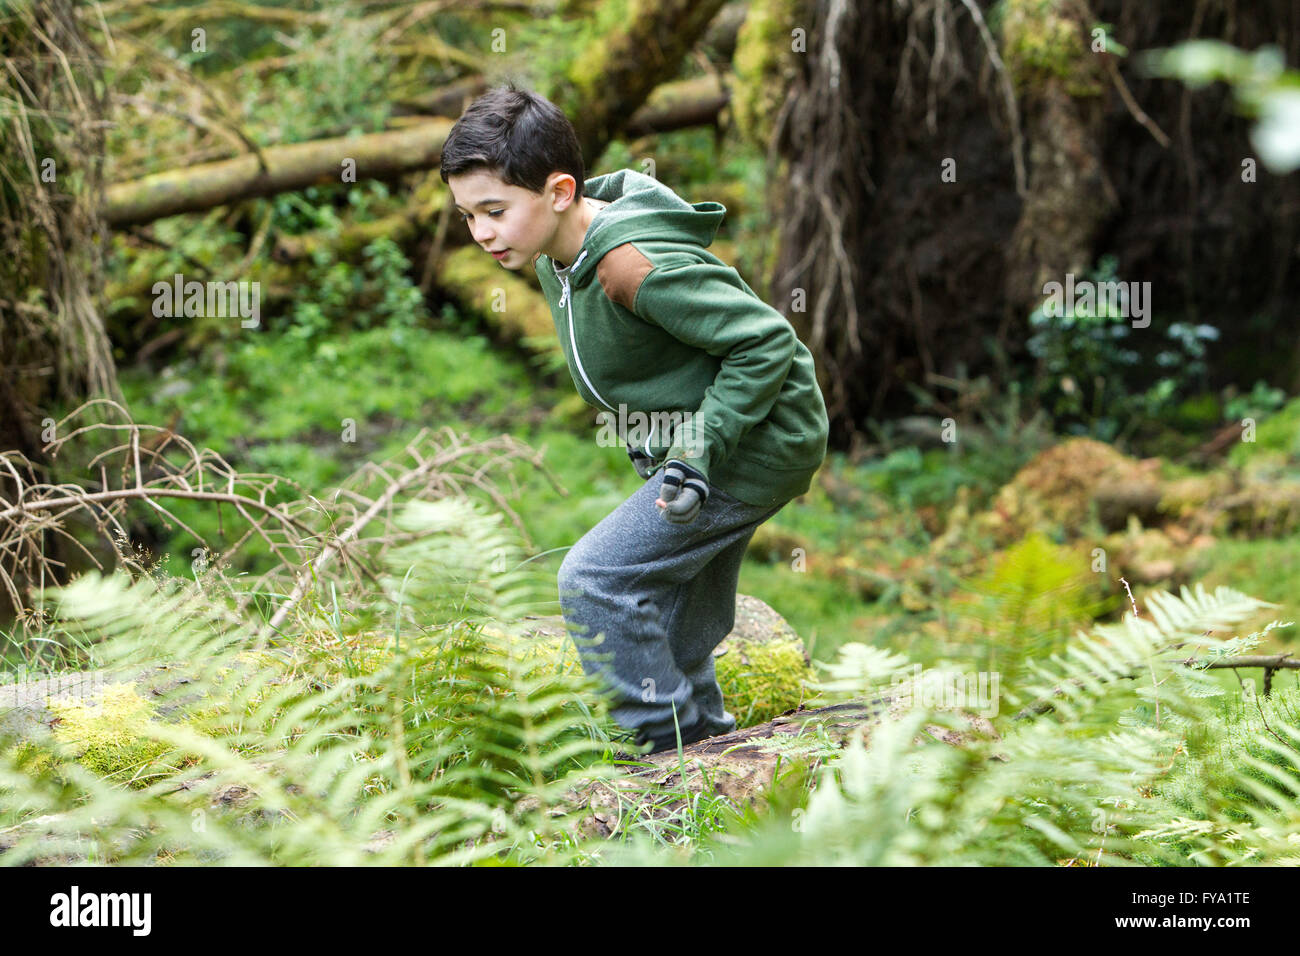 Boy playing in forest Stock Photo